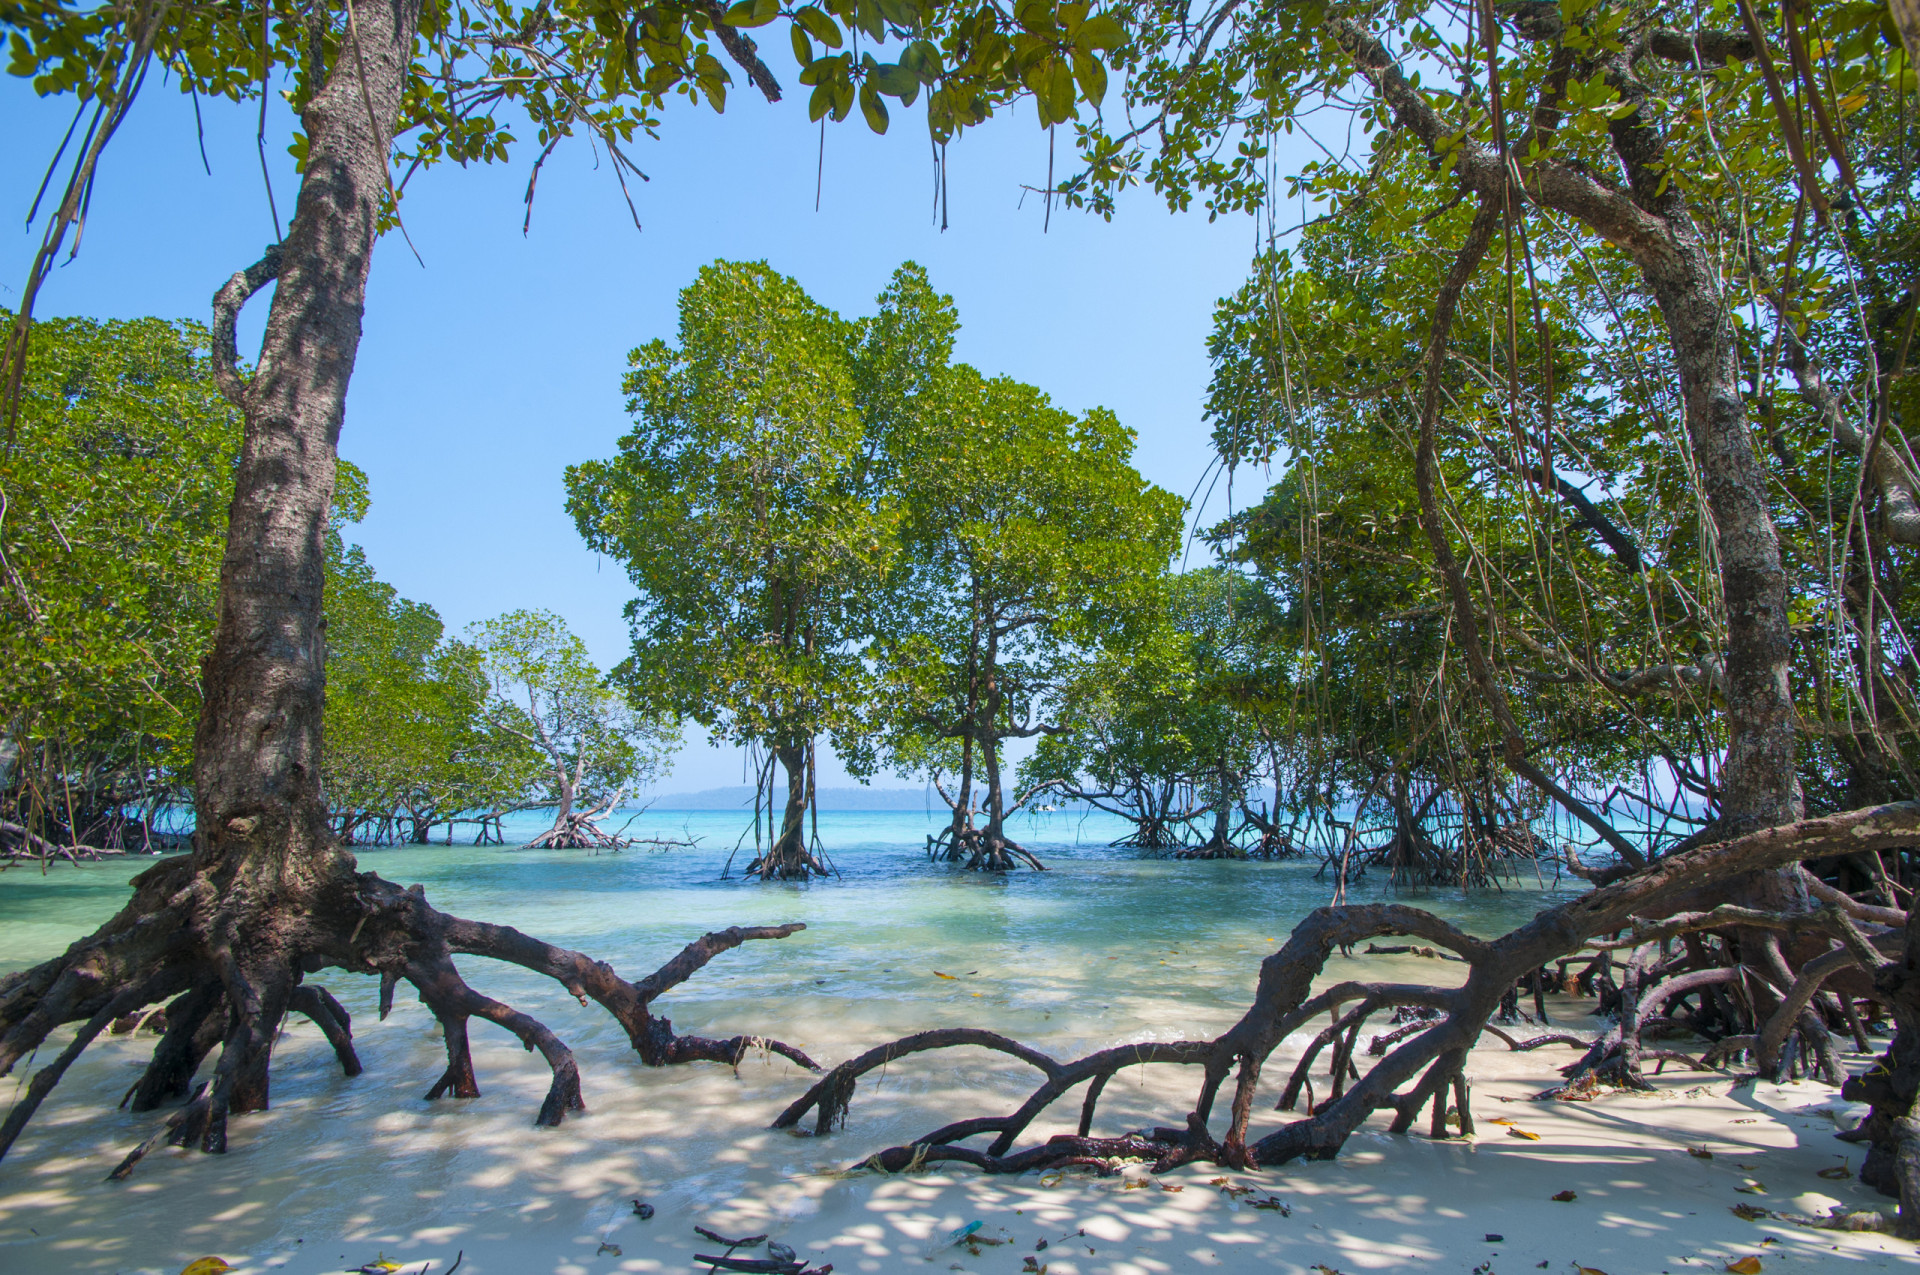 <p>The Andaman island of Swaraj Dweep, previously known as Havelock Island, is an eco-tourism hotspot. It has some of the best beaches in the region, notably Radhanagar Beach, Elephant Beach, and Kalapathar Beach.</p><p><a href="https://www.msn.com/en-my/community/channel/vid-7xx8mnucu55yw63we9va2gwr7uihbxwc68fxqp25x6tg4ftibpra?cvid=94631541bc0f4f89bfd59158d696ad7e">Follow us and access great exclusive content every day</a></p>